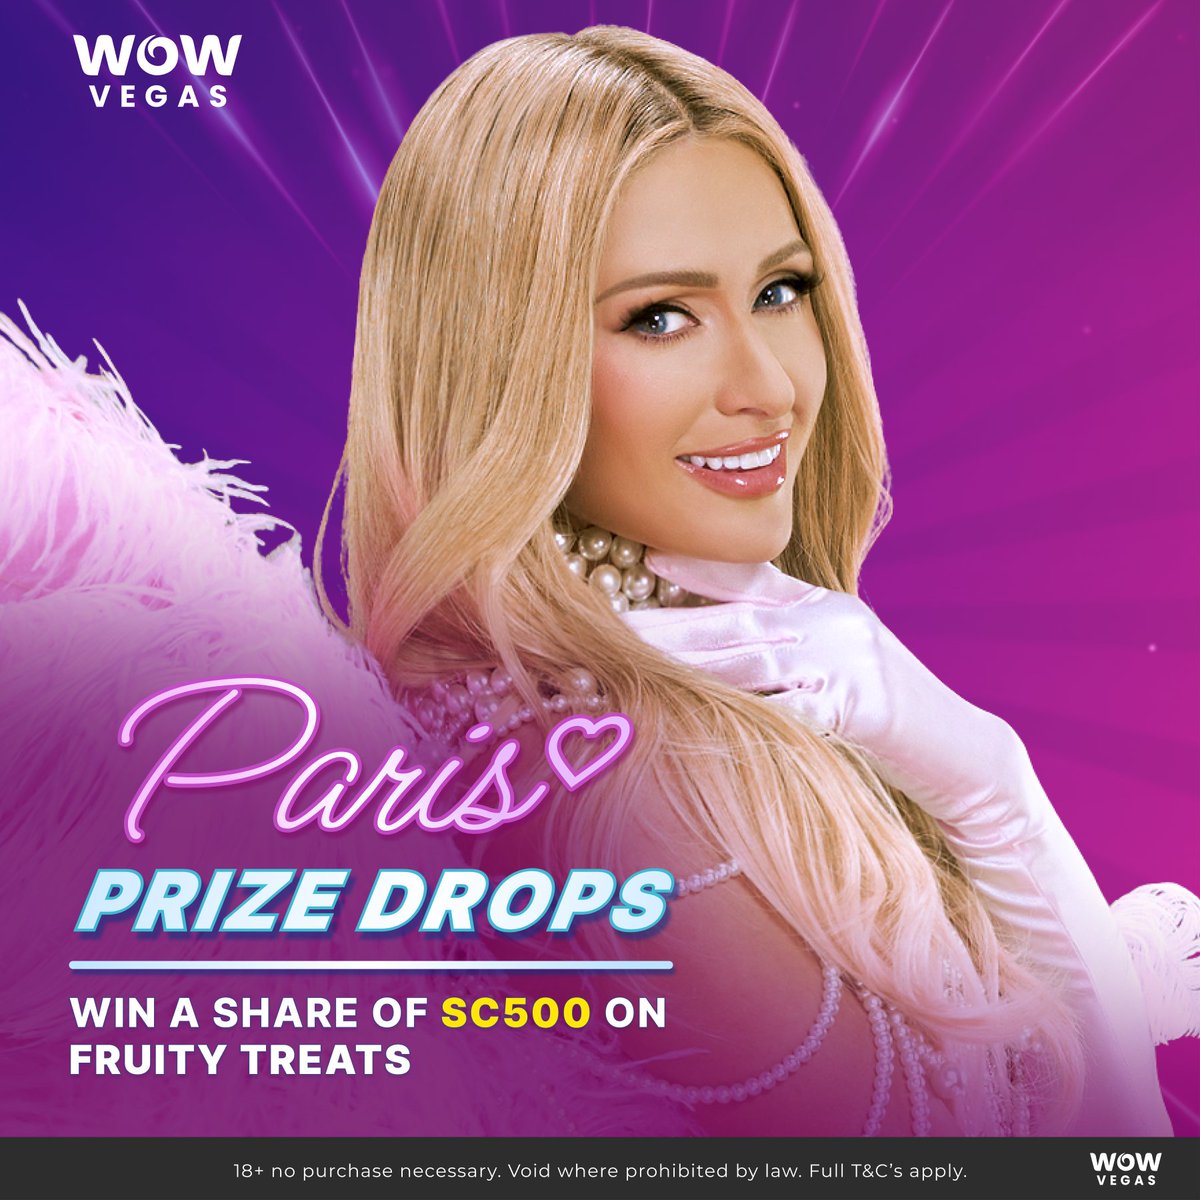 Fruity Treats was released today by Pragmatic Play, and is already available to play at WOW Vegas!🍇🍉🍓 Play Fruity Treats with SC before midnight PT tonight, and you could win a share of SC 500! Spin those reels and indulge in the fruity goodness of Fruity Treats today! 🍊🍇